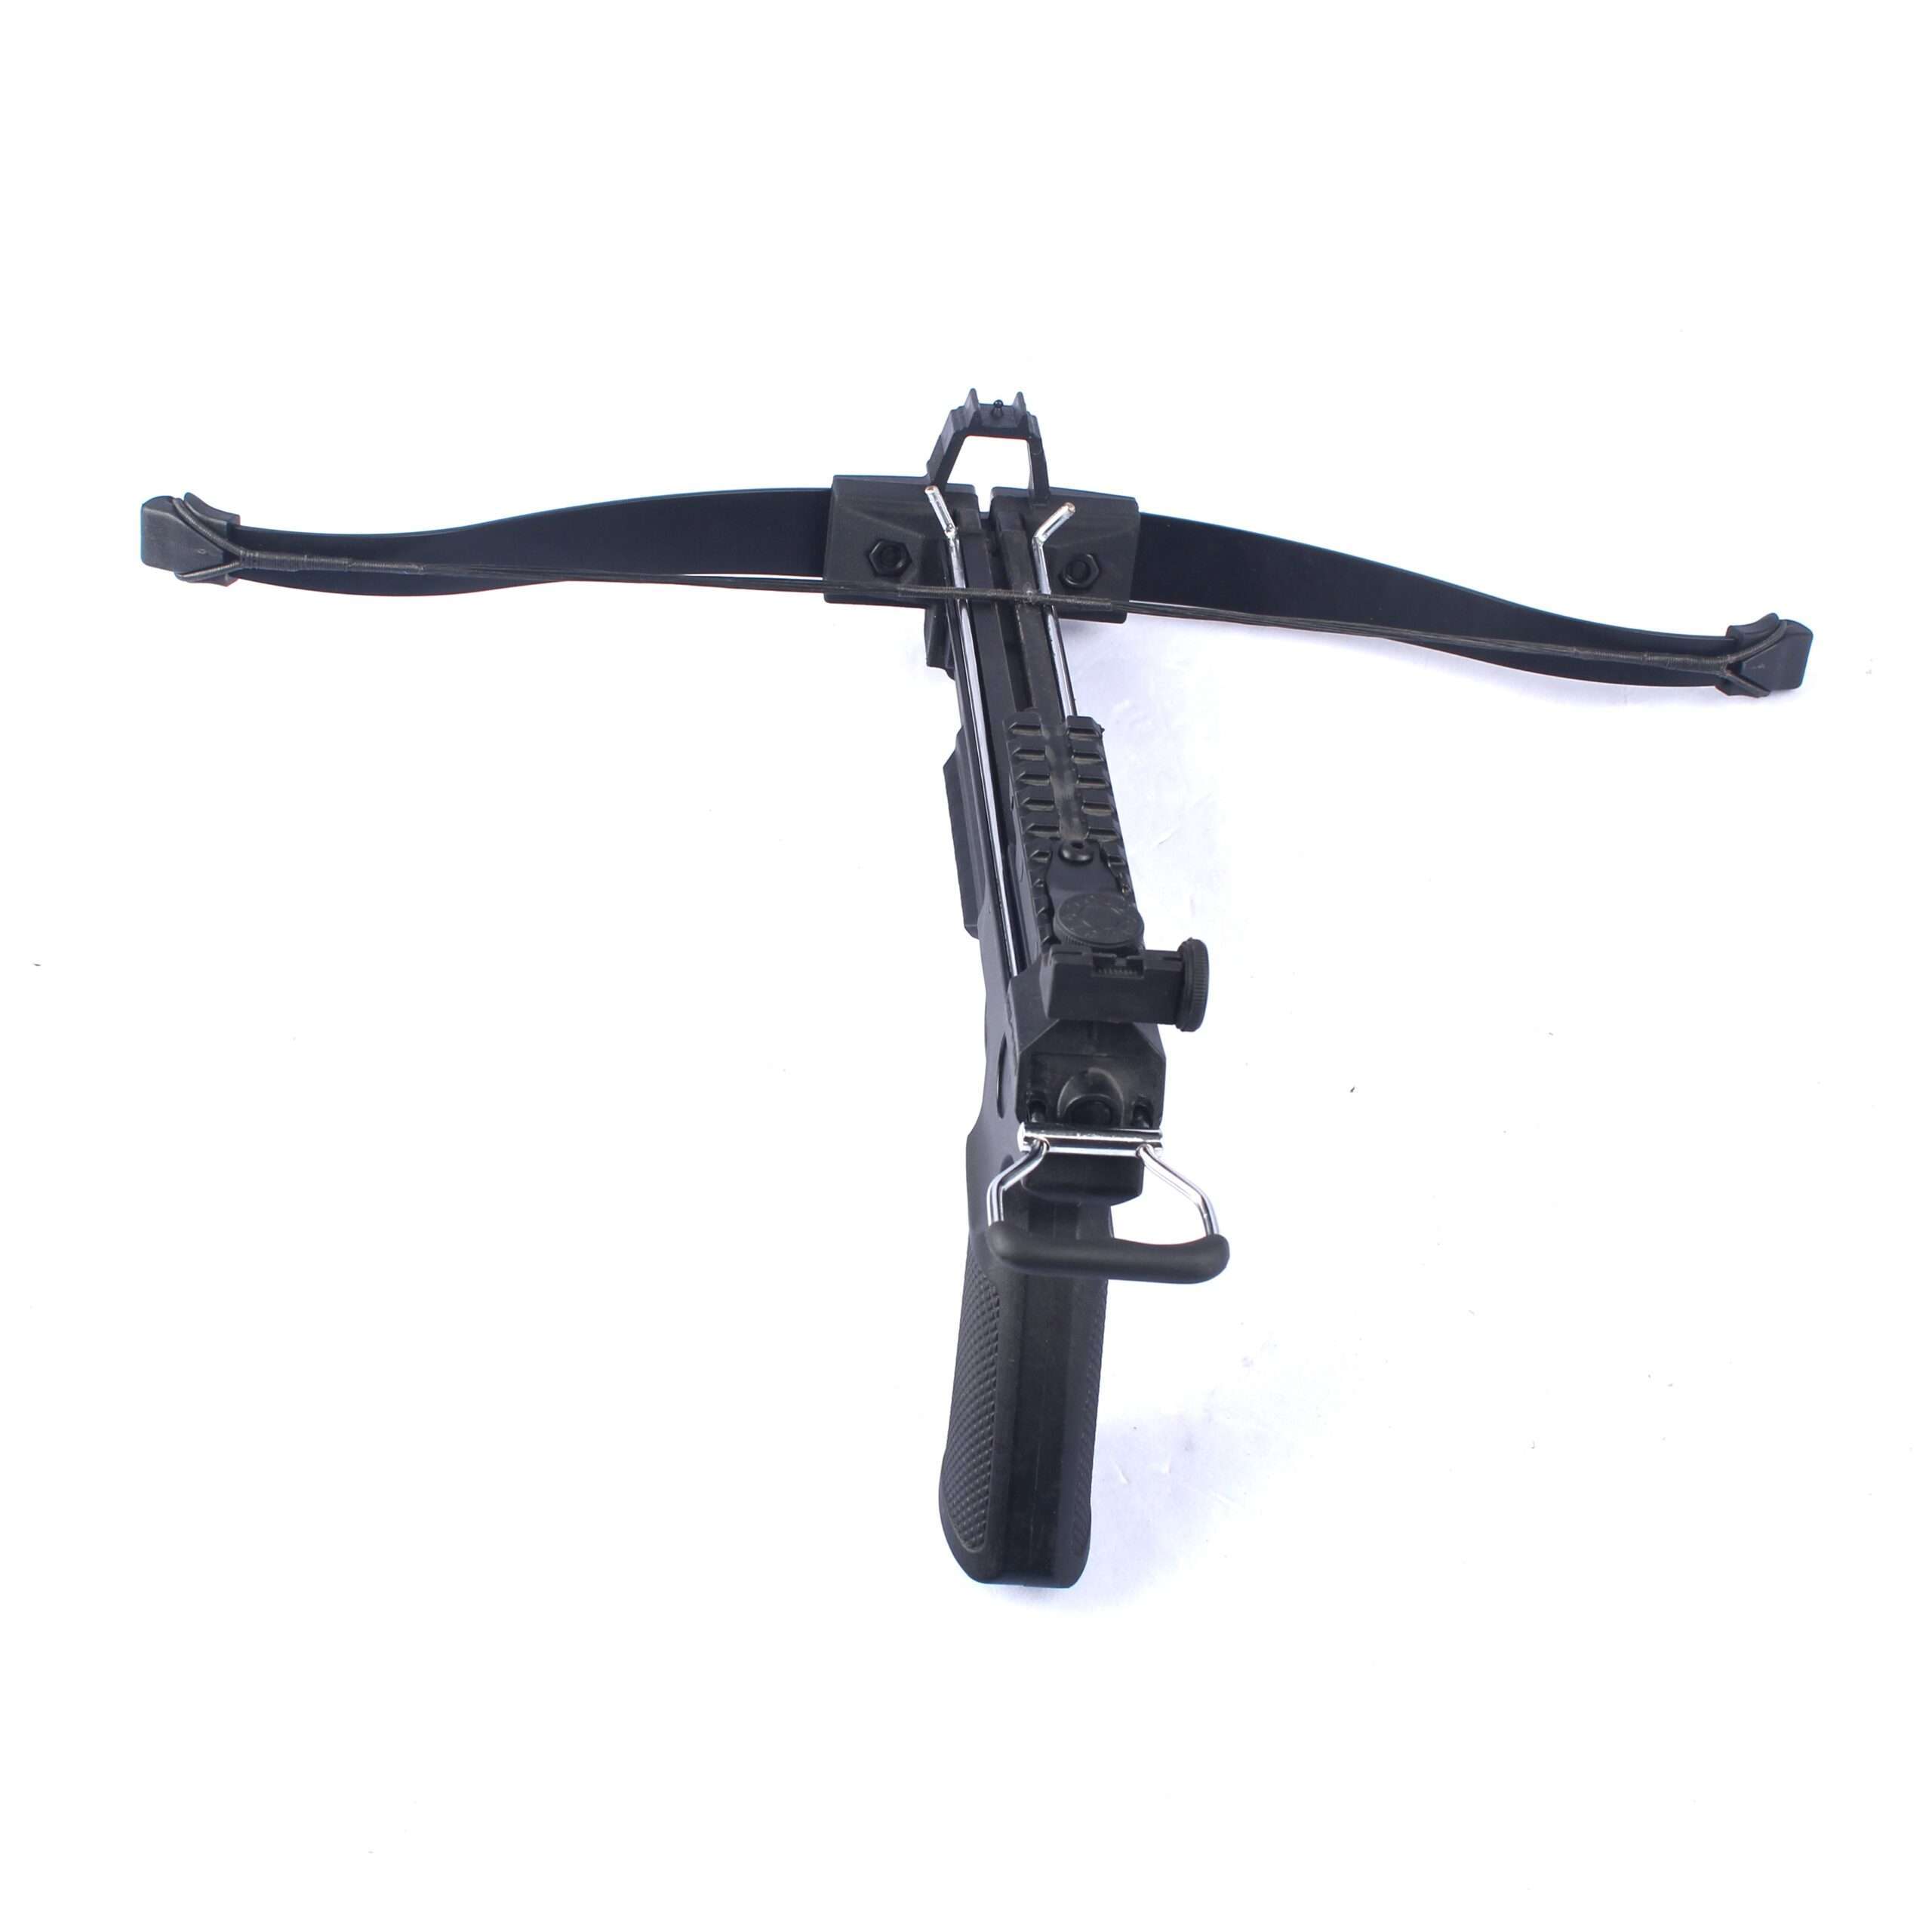 80 lbs Mongoose crossbow with upper and lower picatinny rails (22mm)